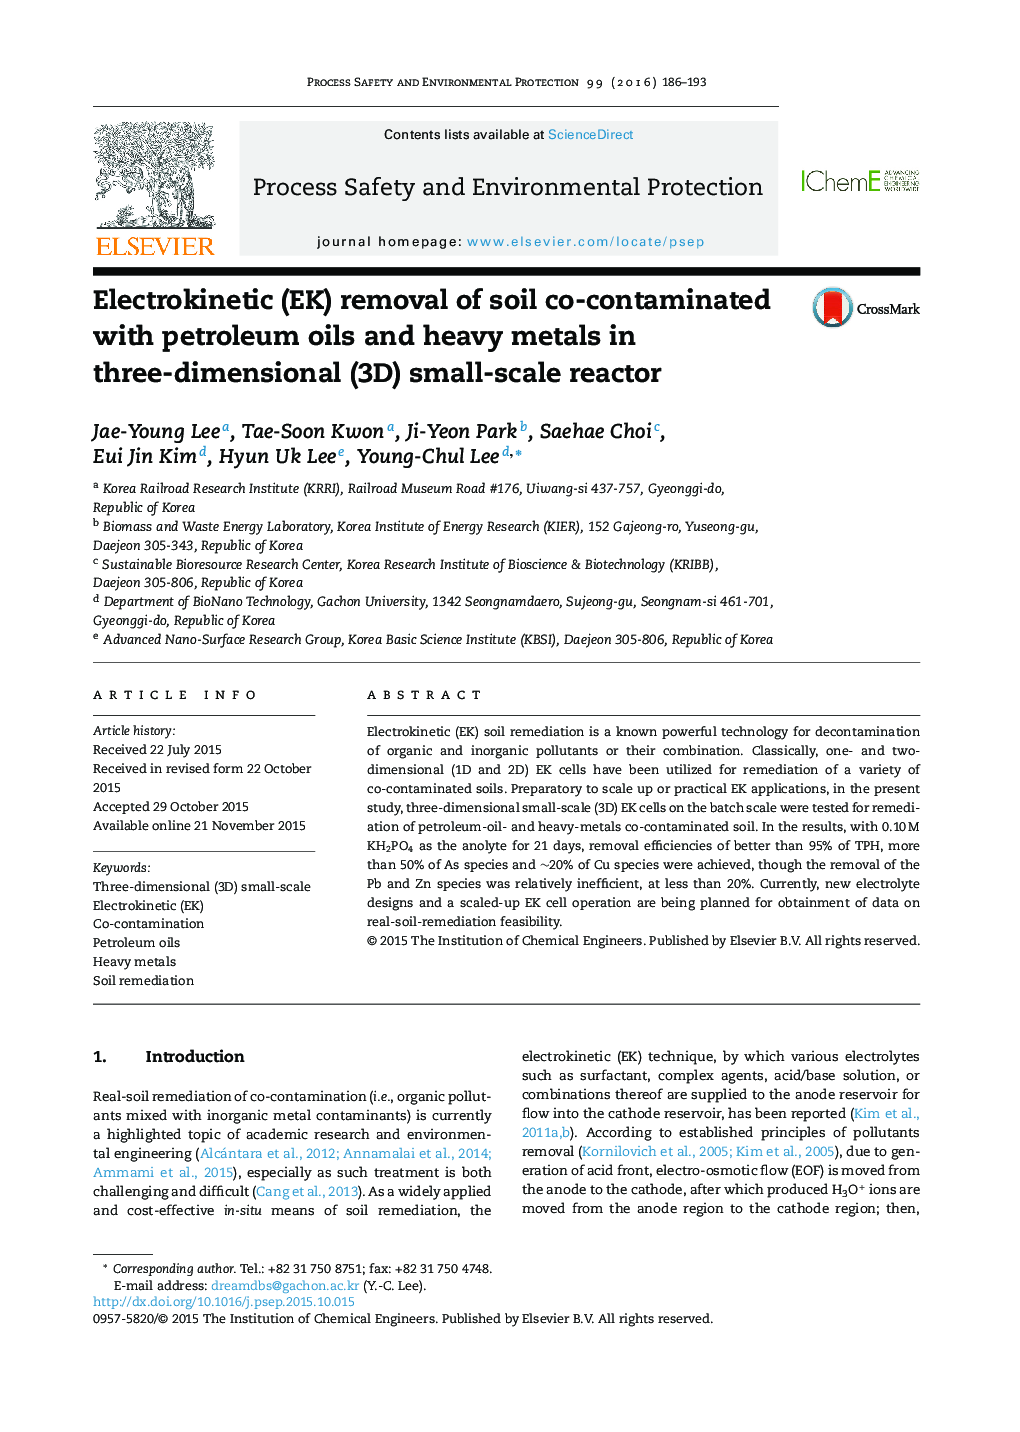 Electrokinetic (EK) removal of soil co-contaminated with petroleum oils and heavy metals in three-dimensional (3D) small-scale reactor